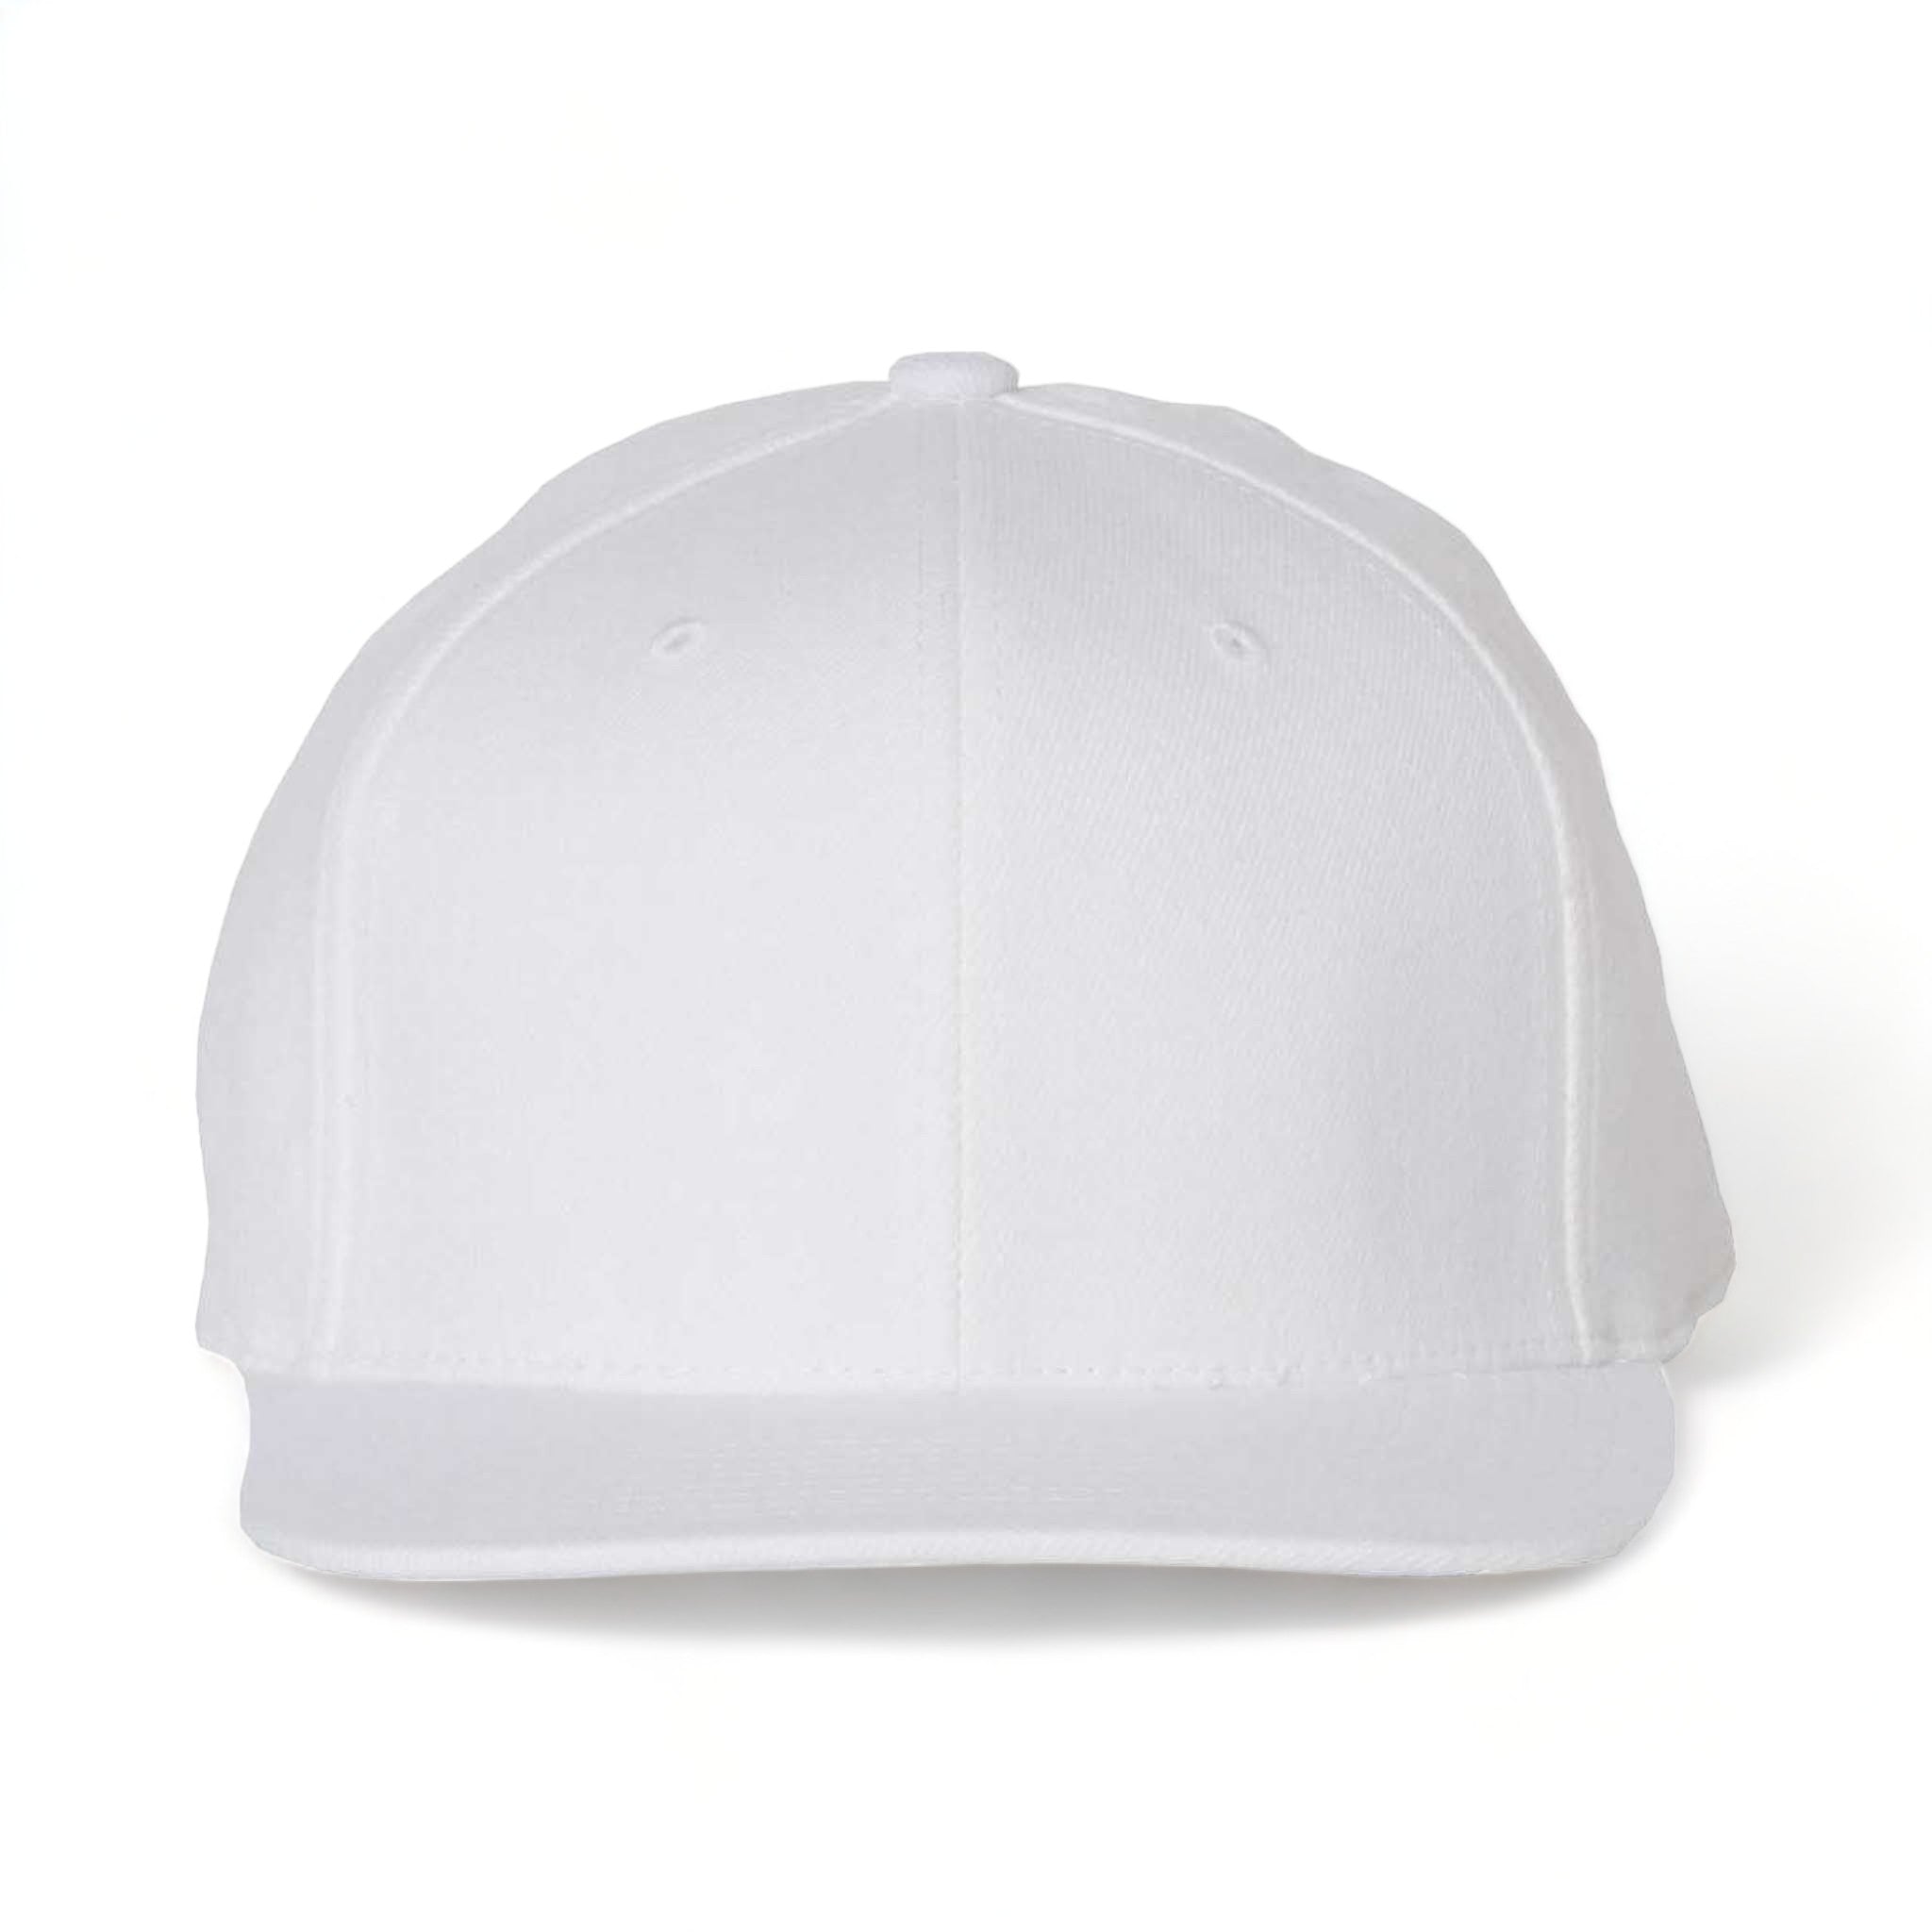 Front view of Flexfit 110F custom hat in white